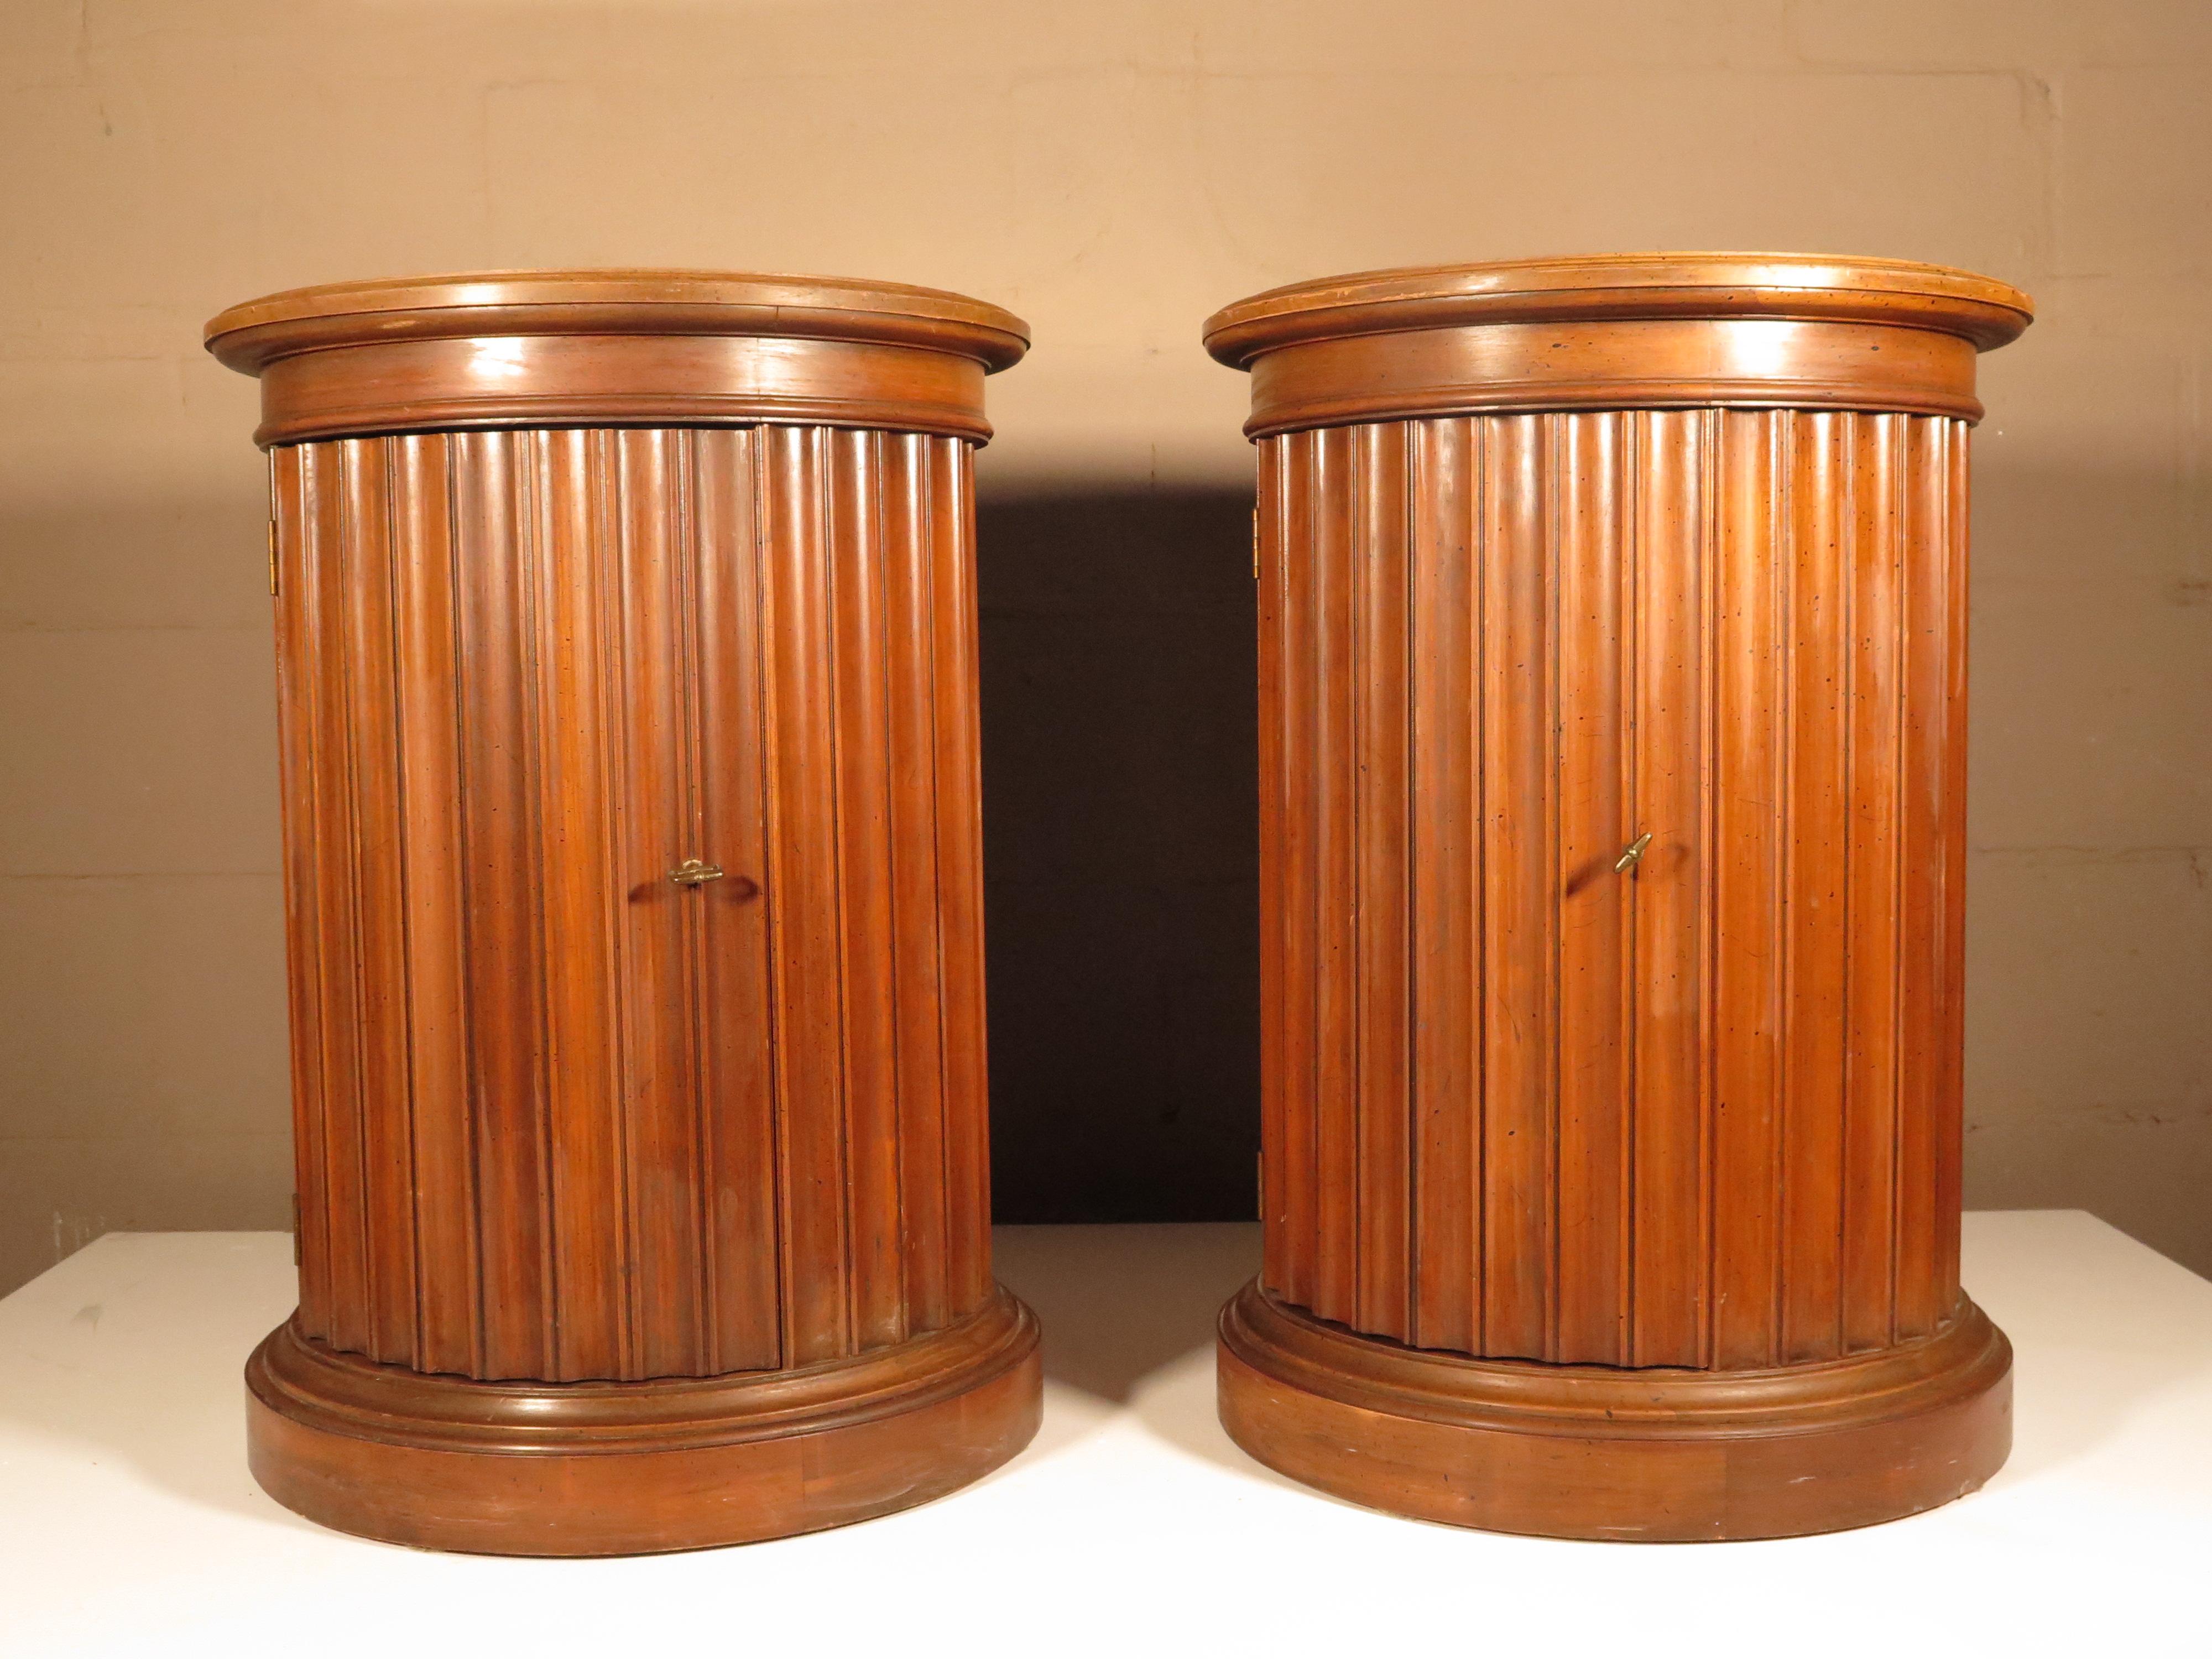 Modern Pair of Burlwood Pedestal Tables with Speckled Finish For Sale